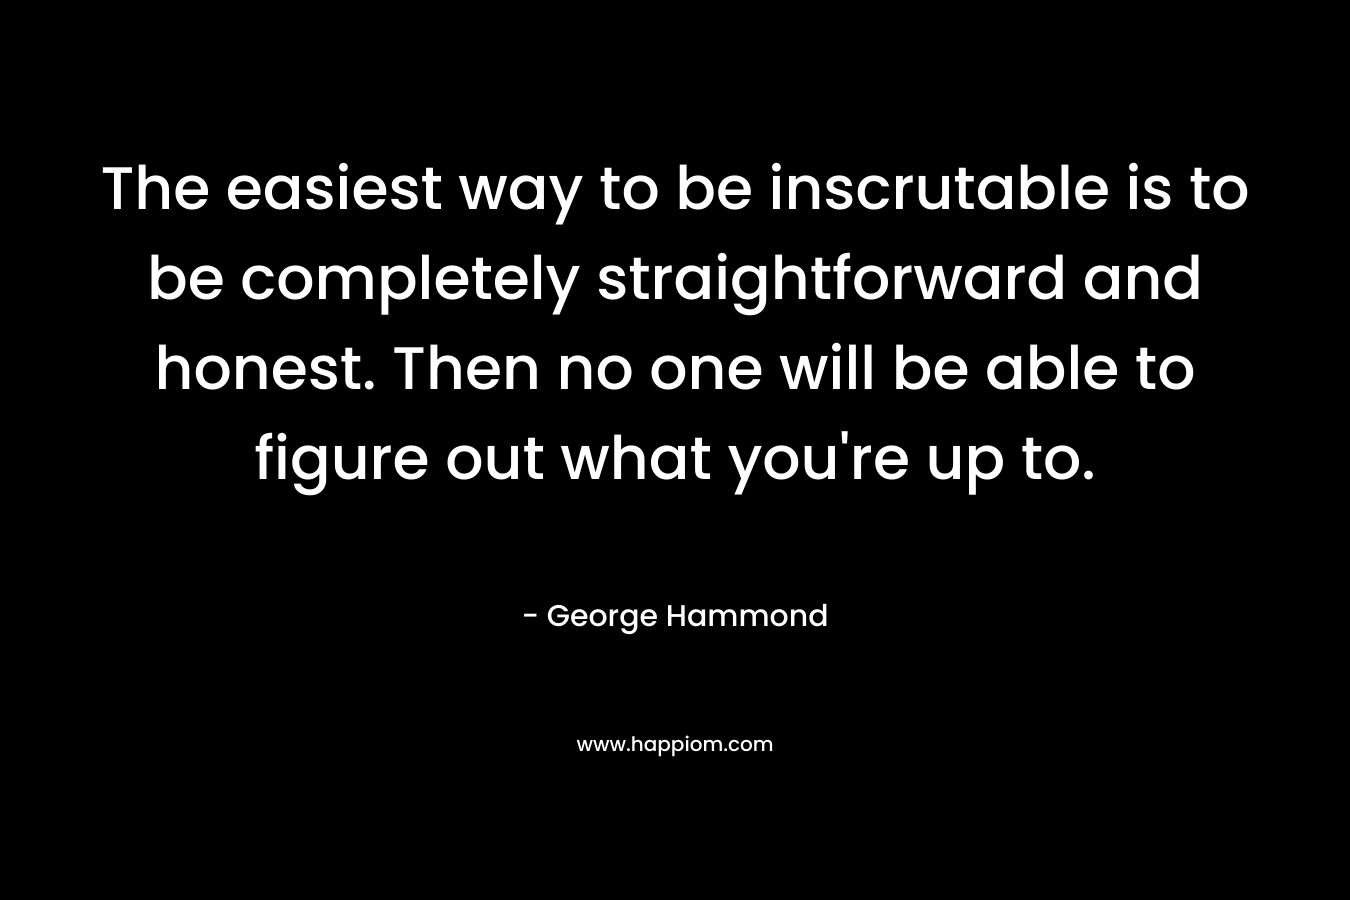 The easiest way to be inscrutable is to be completely straightforward and honest. Then no one will be able to figure out what you’re up to. – George Hammond